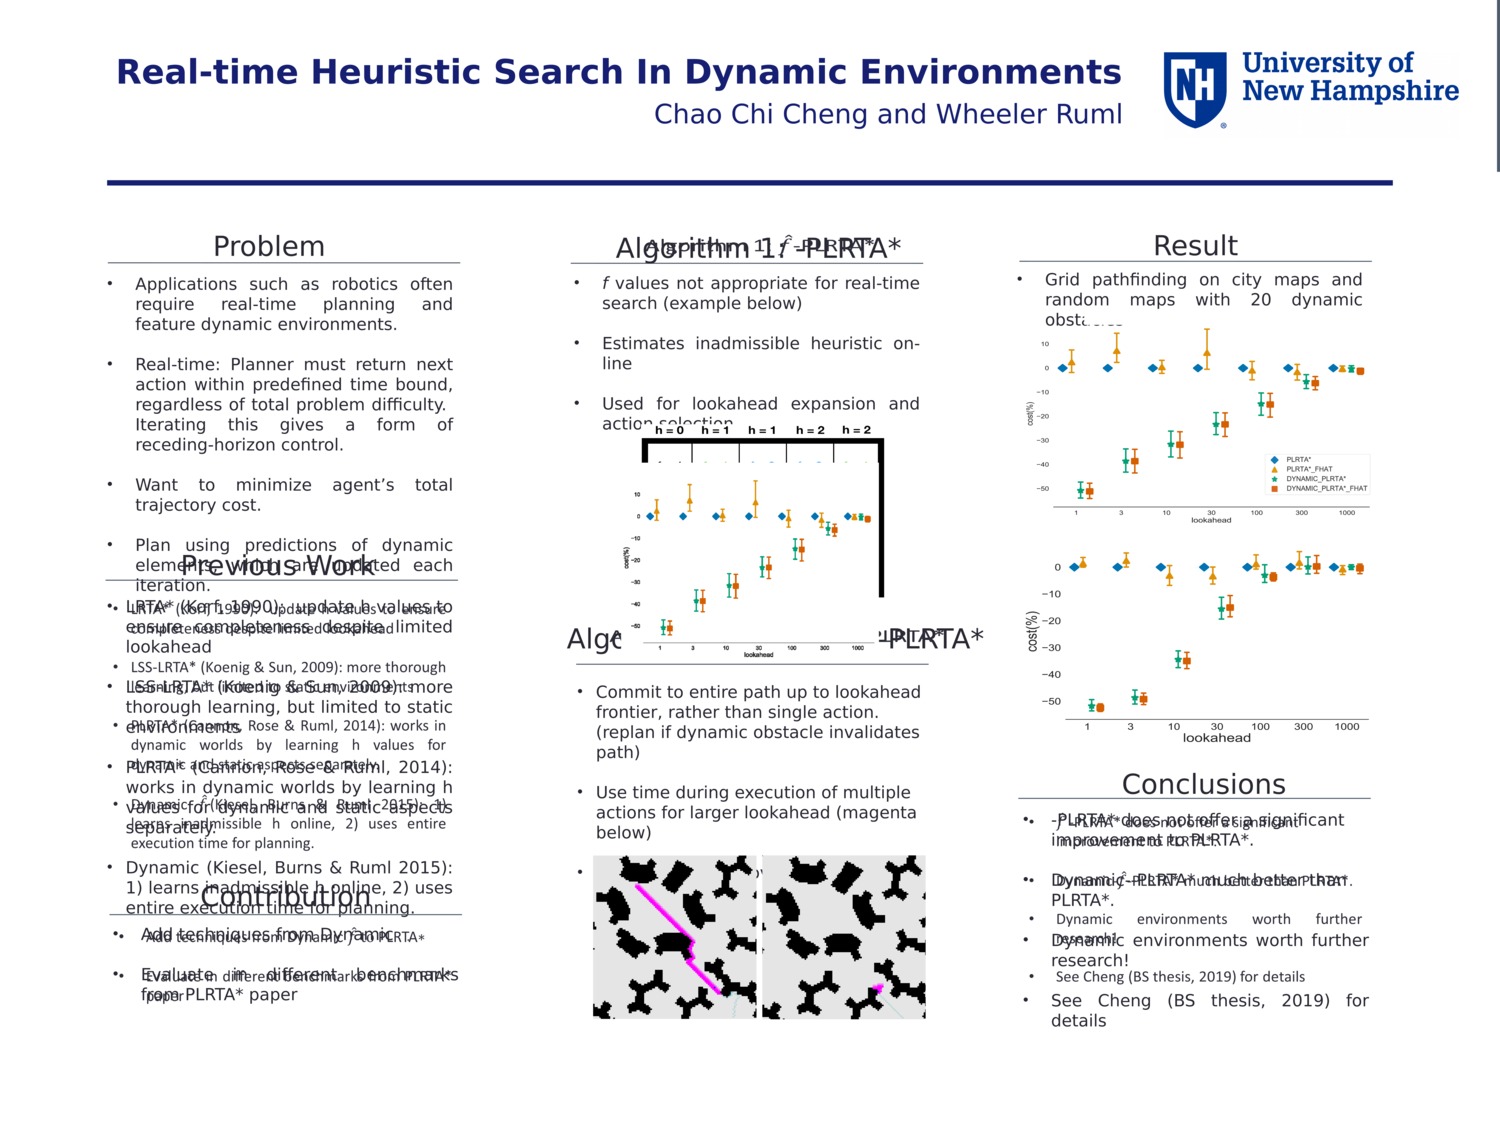 Real-Time Heuristic Search In Dynamic Environments by ruml